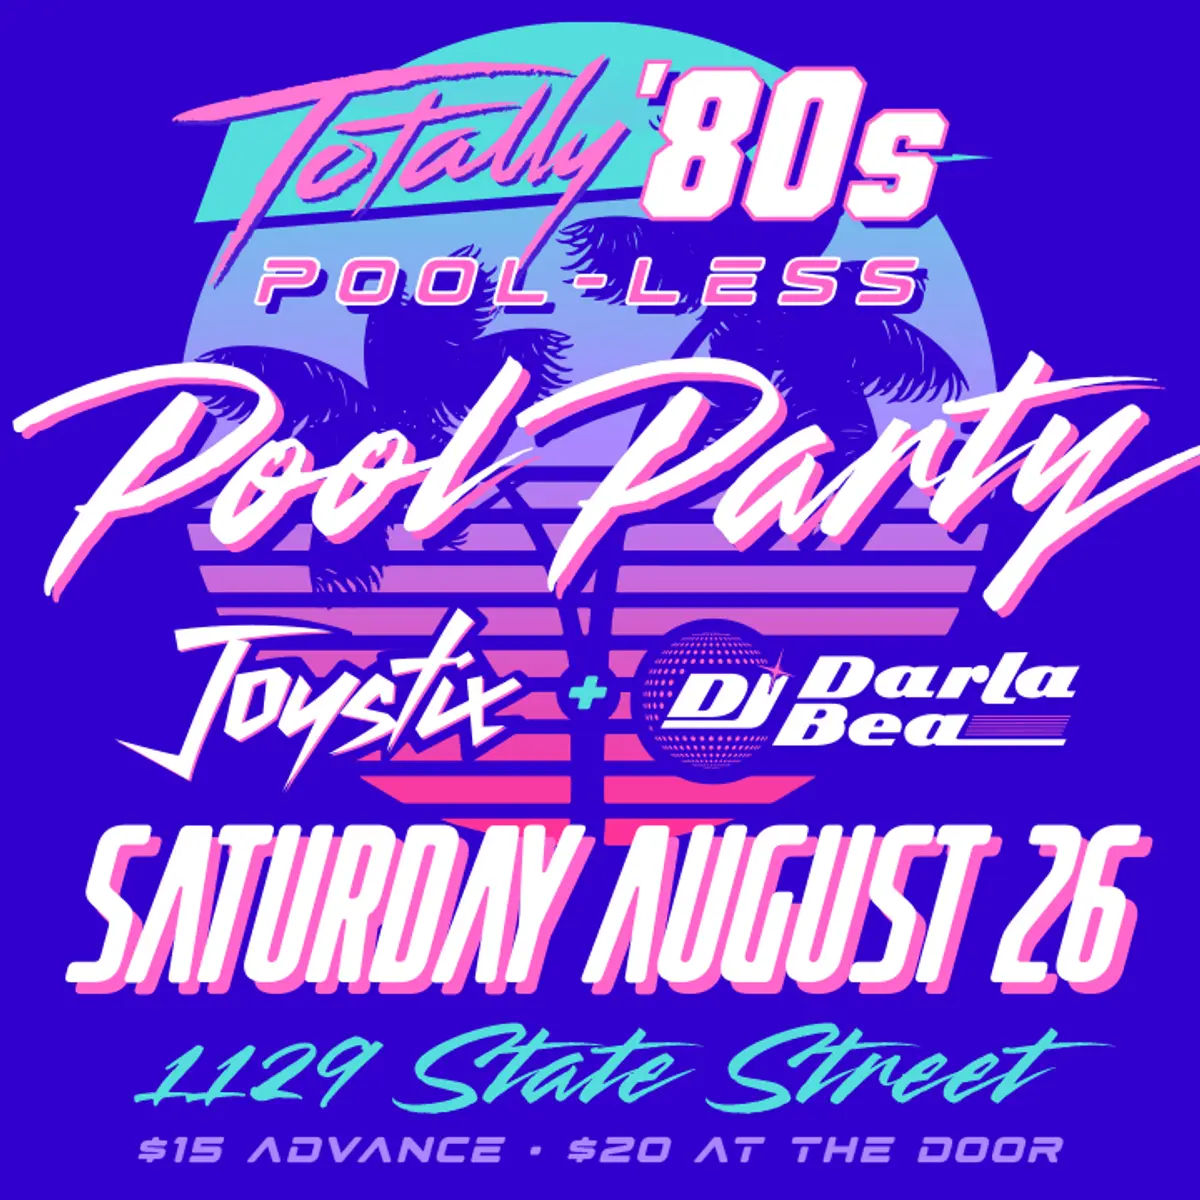 Totally '80s Pool-Less Pool Party